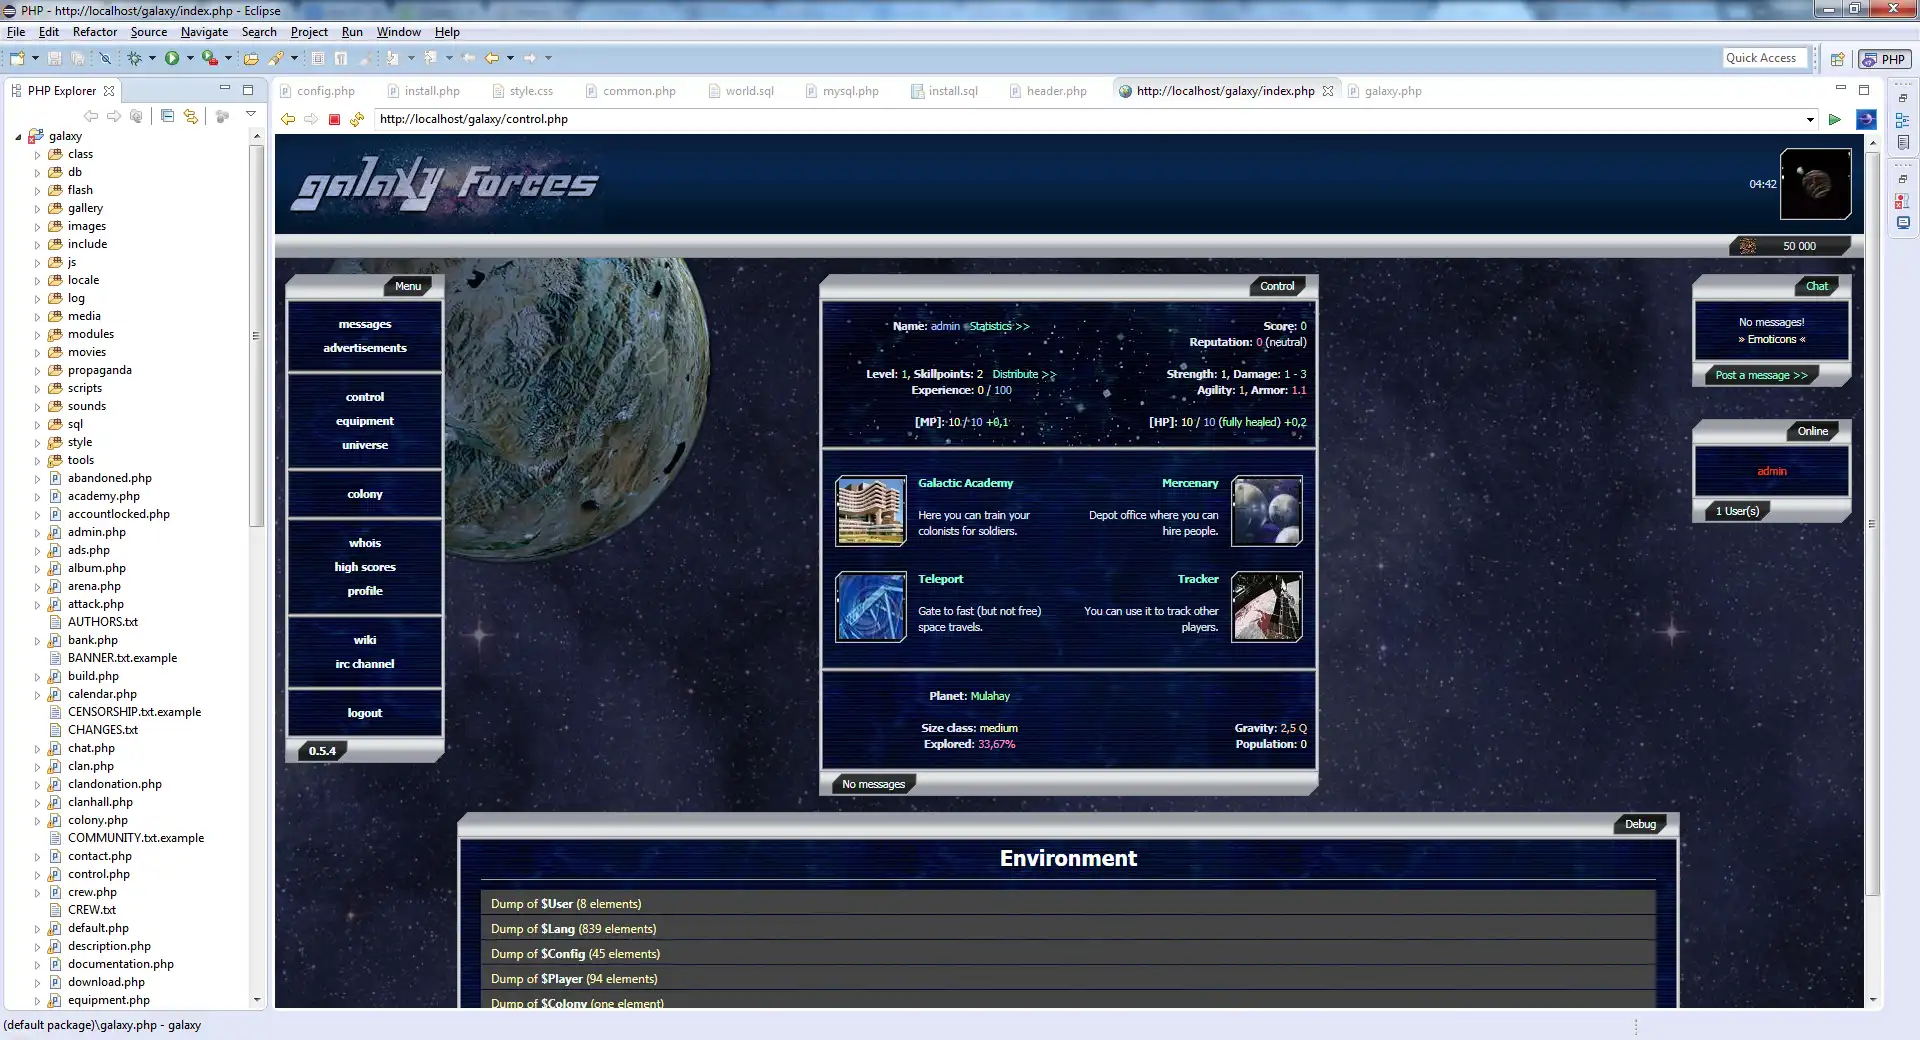 Download web tool or web app Galaxy Forces MMORPG to run in Linux online